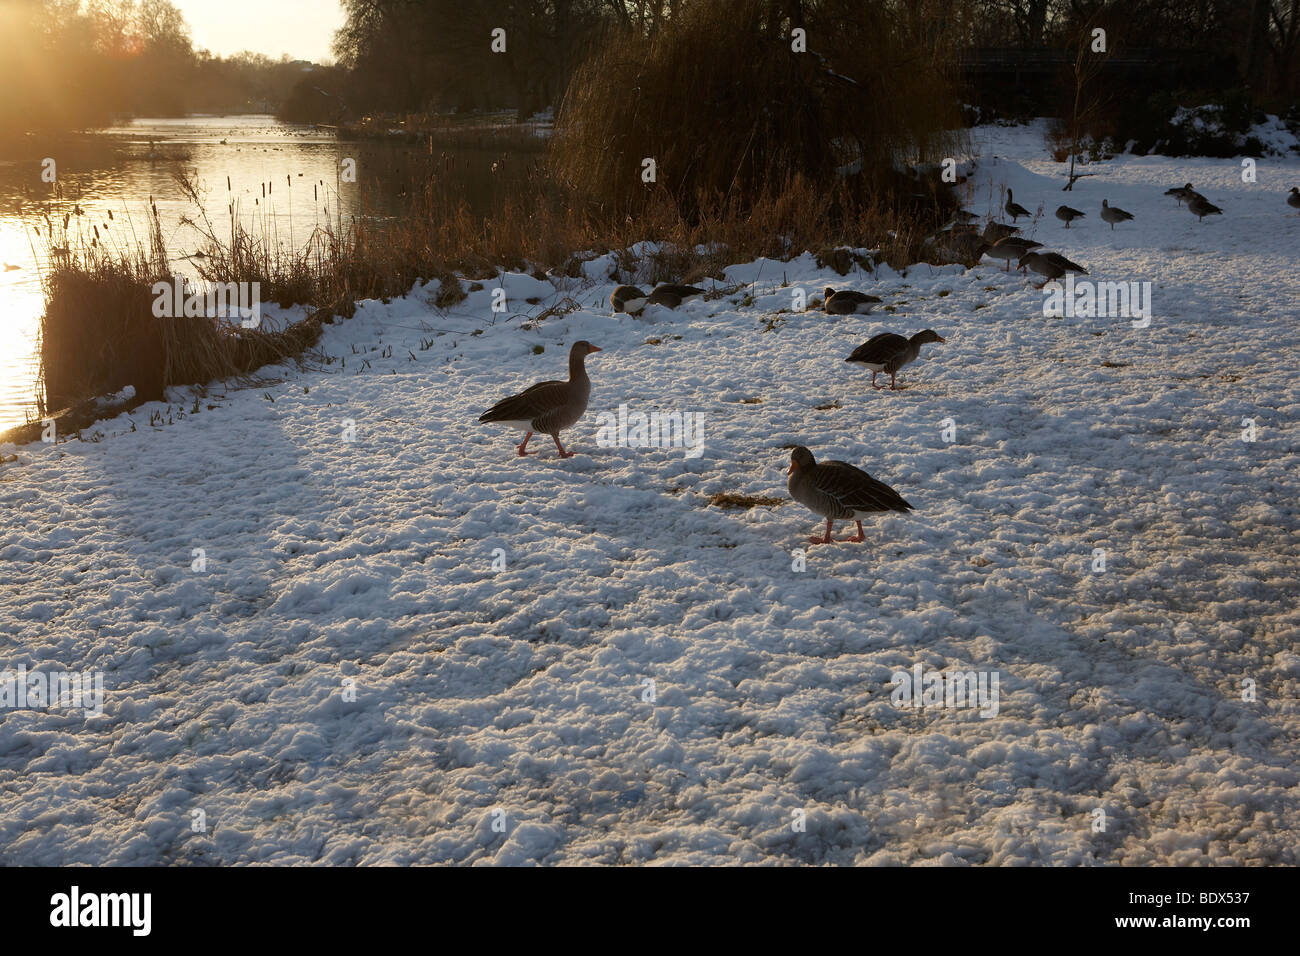 LONDON: GEESE AND ST JAMES' PARK IN THE SNOW Stock Photo